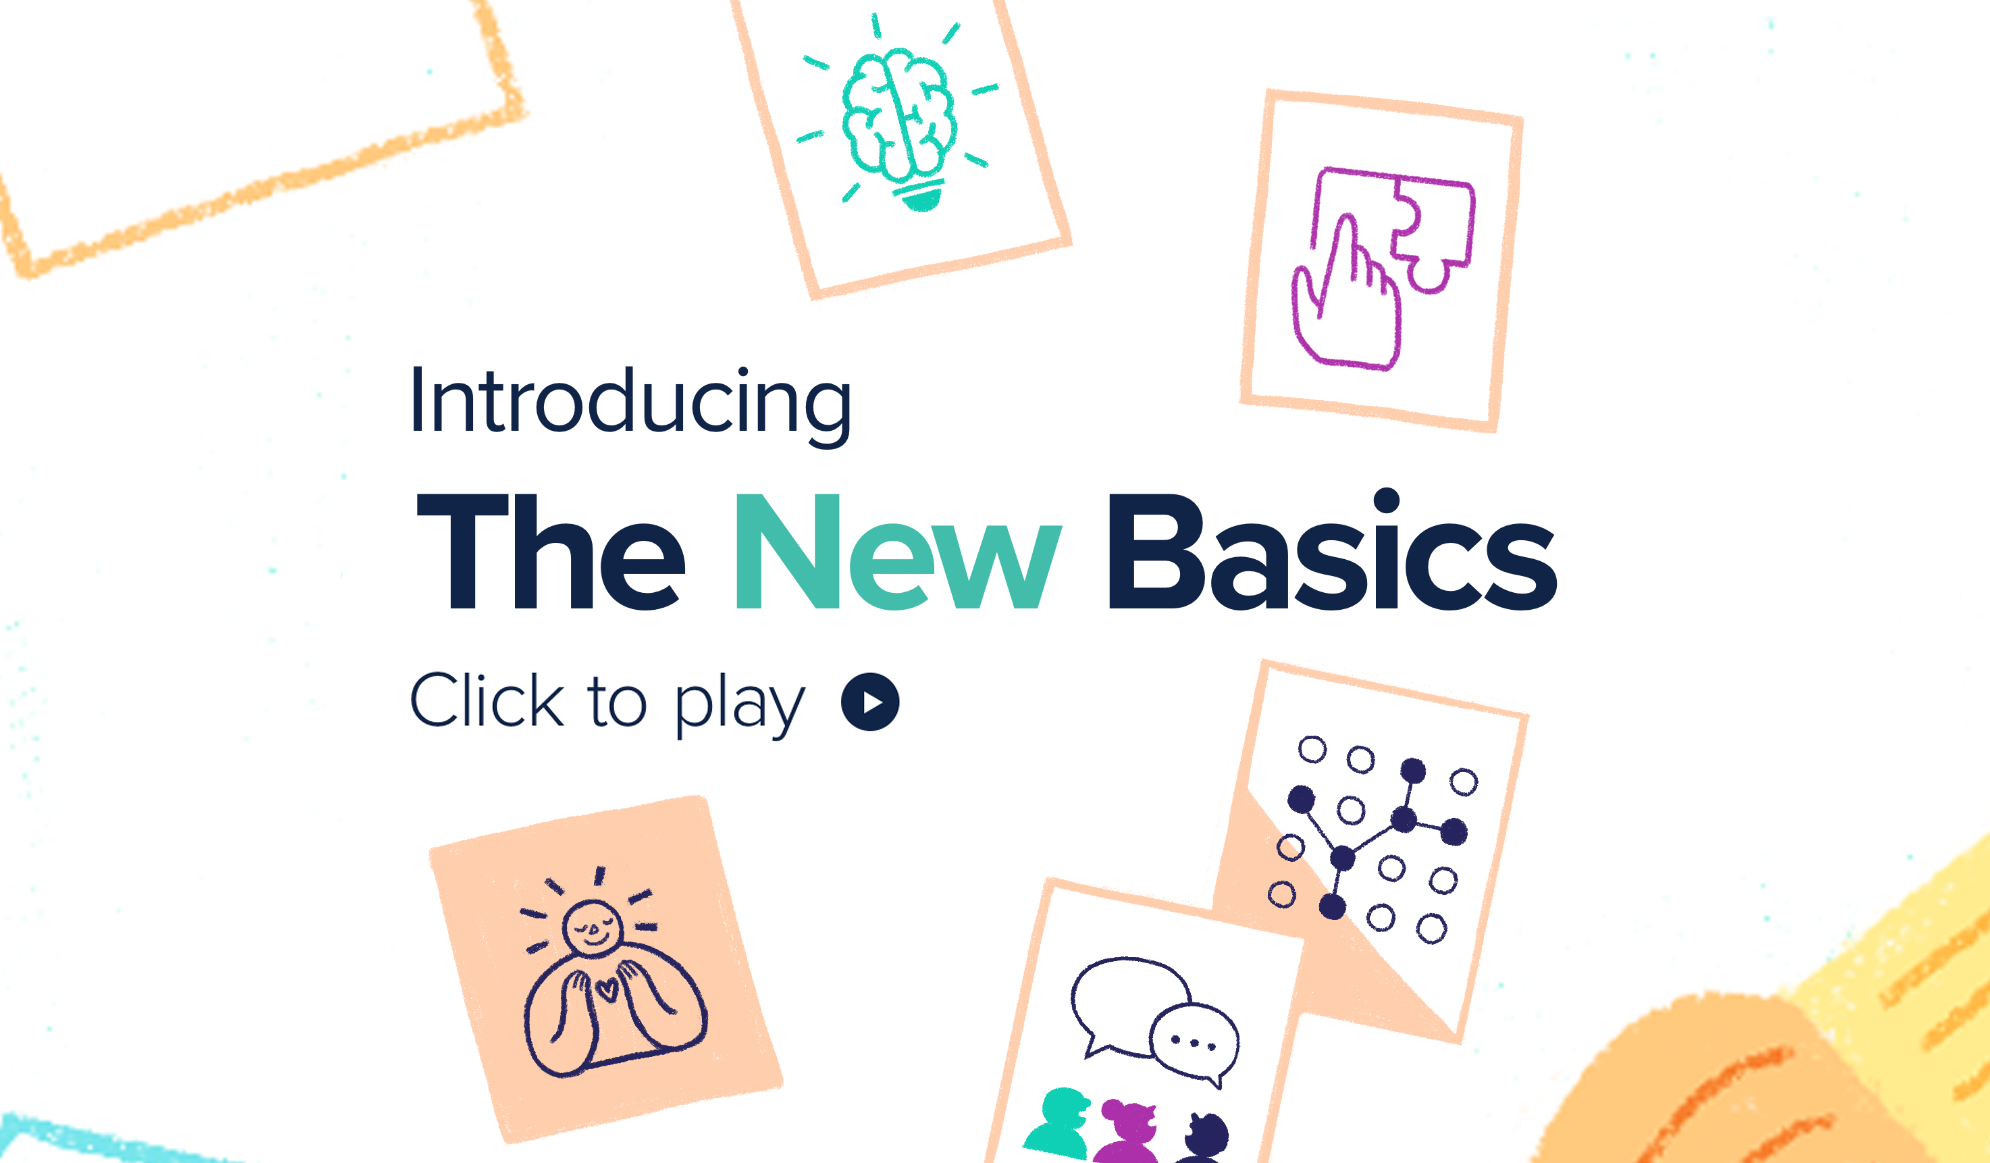 Learn about The New Basics